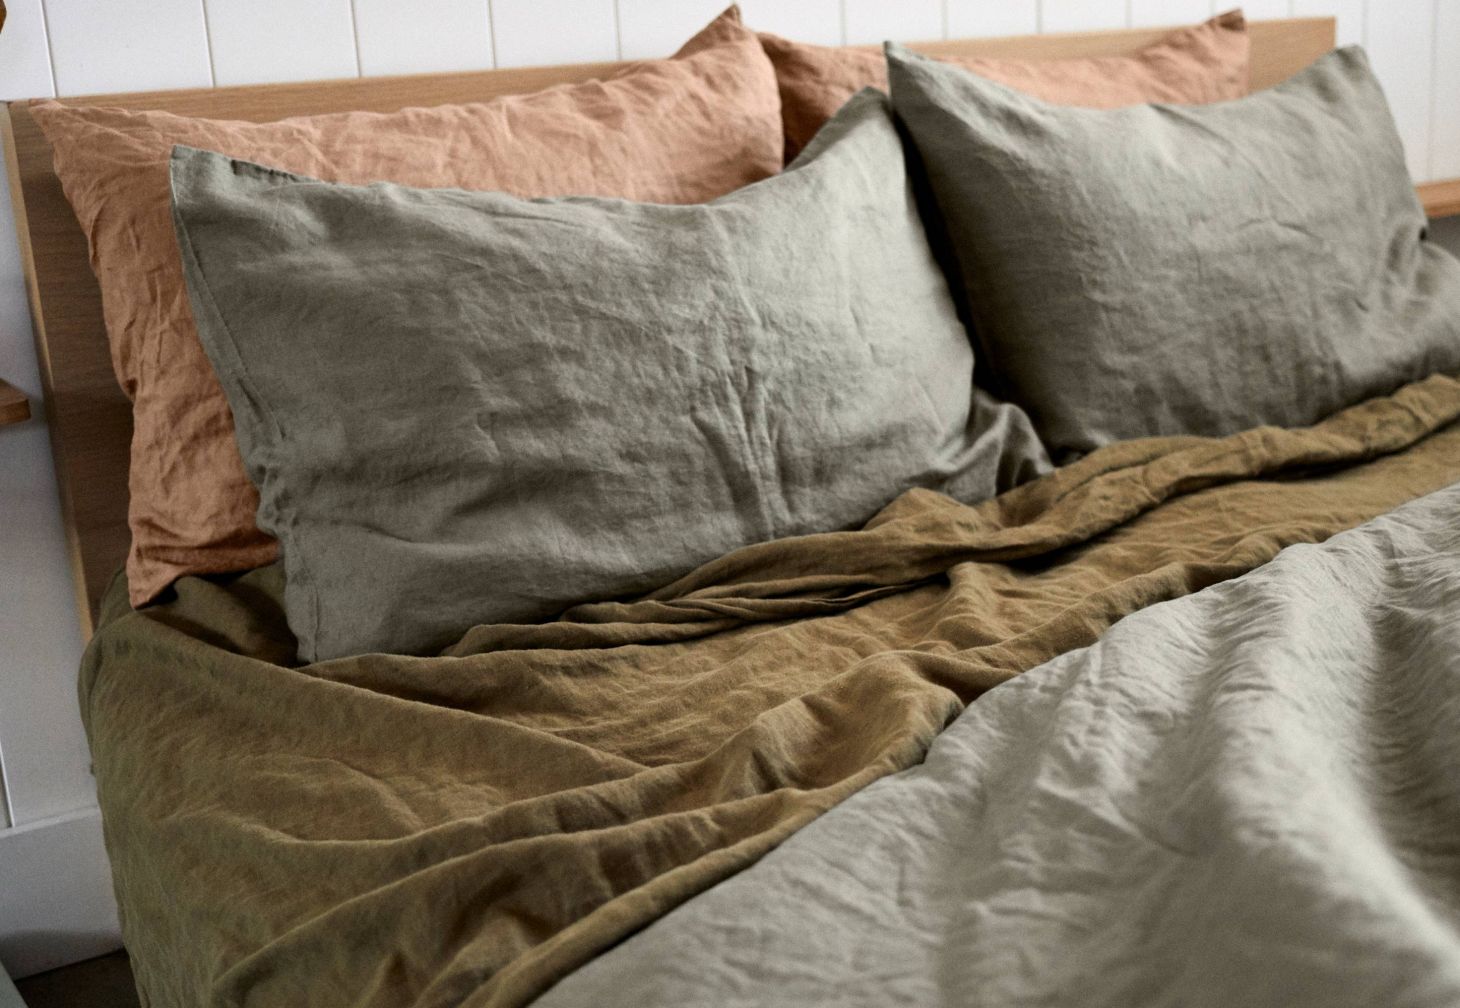 Linen duvet cover, pillow slips and sheets by IN BED